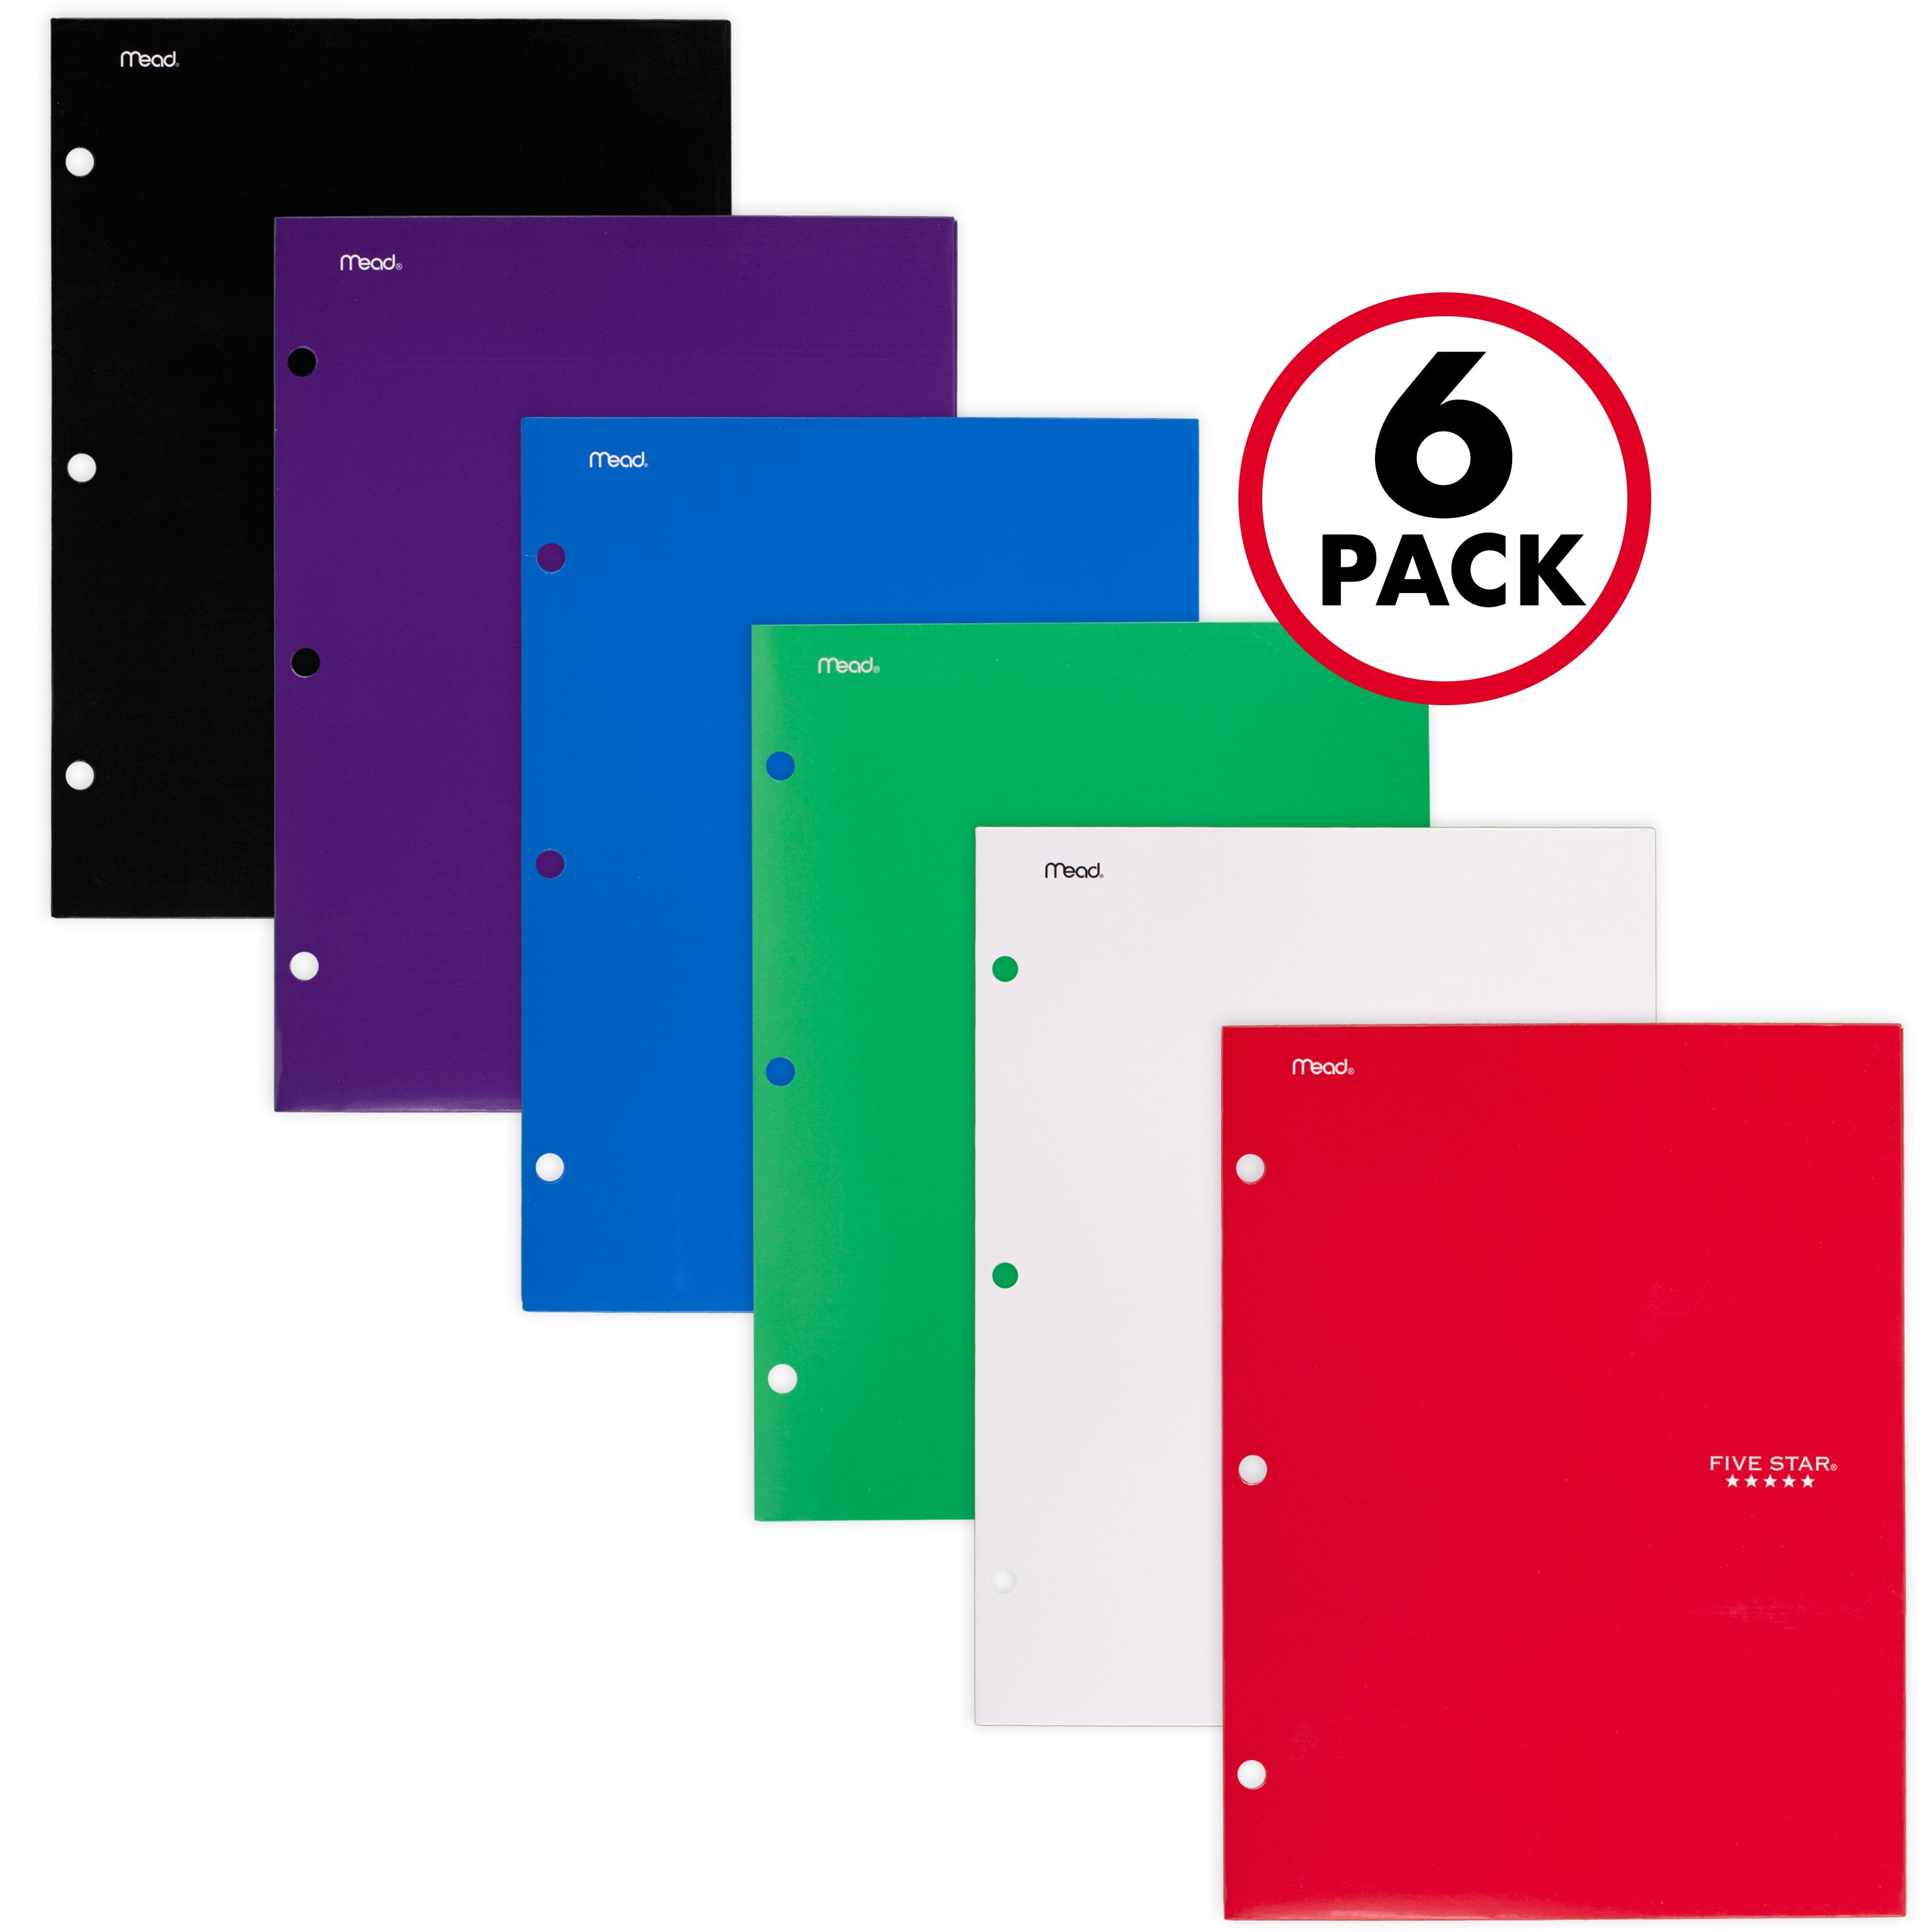 Mead Five Star 4 Pocket Paper Folder Durable Laminate Conversion & Other Tables 